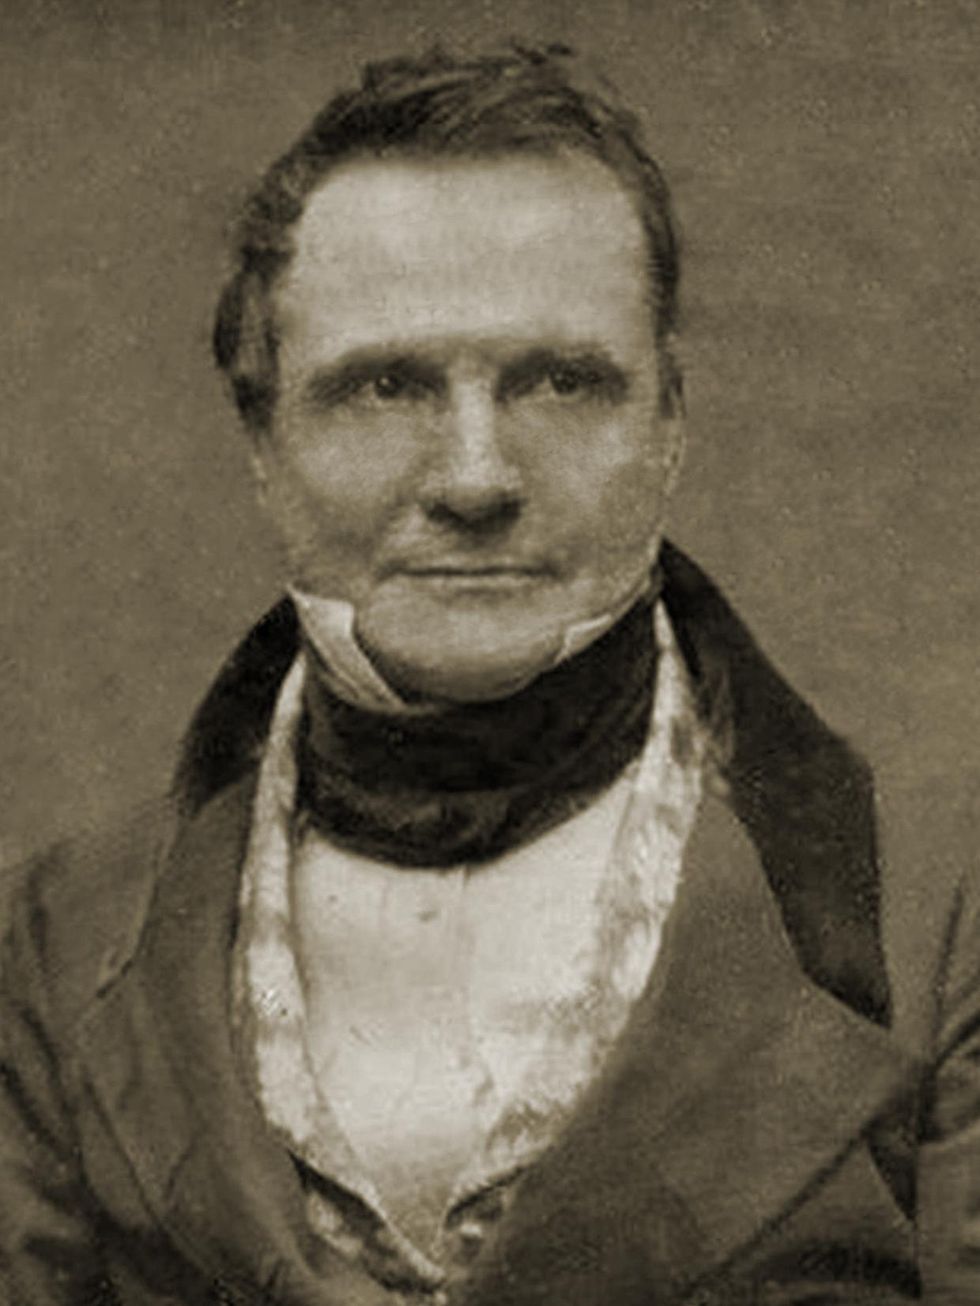 A daguerreotype portrait of British mathematician Charles Babbage shows a man in period dress of the mid-19th century.